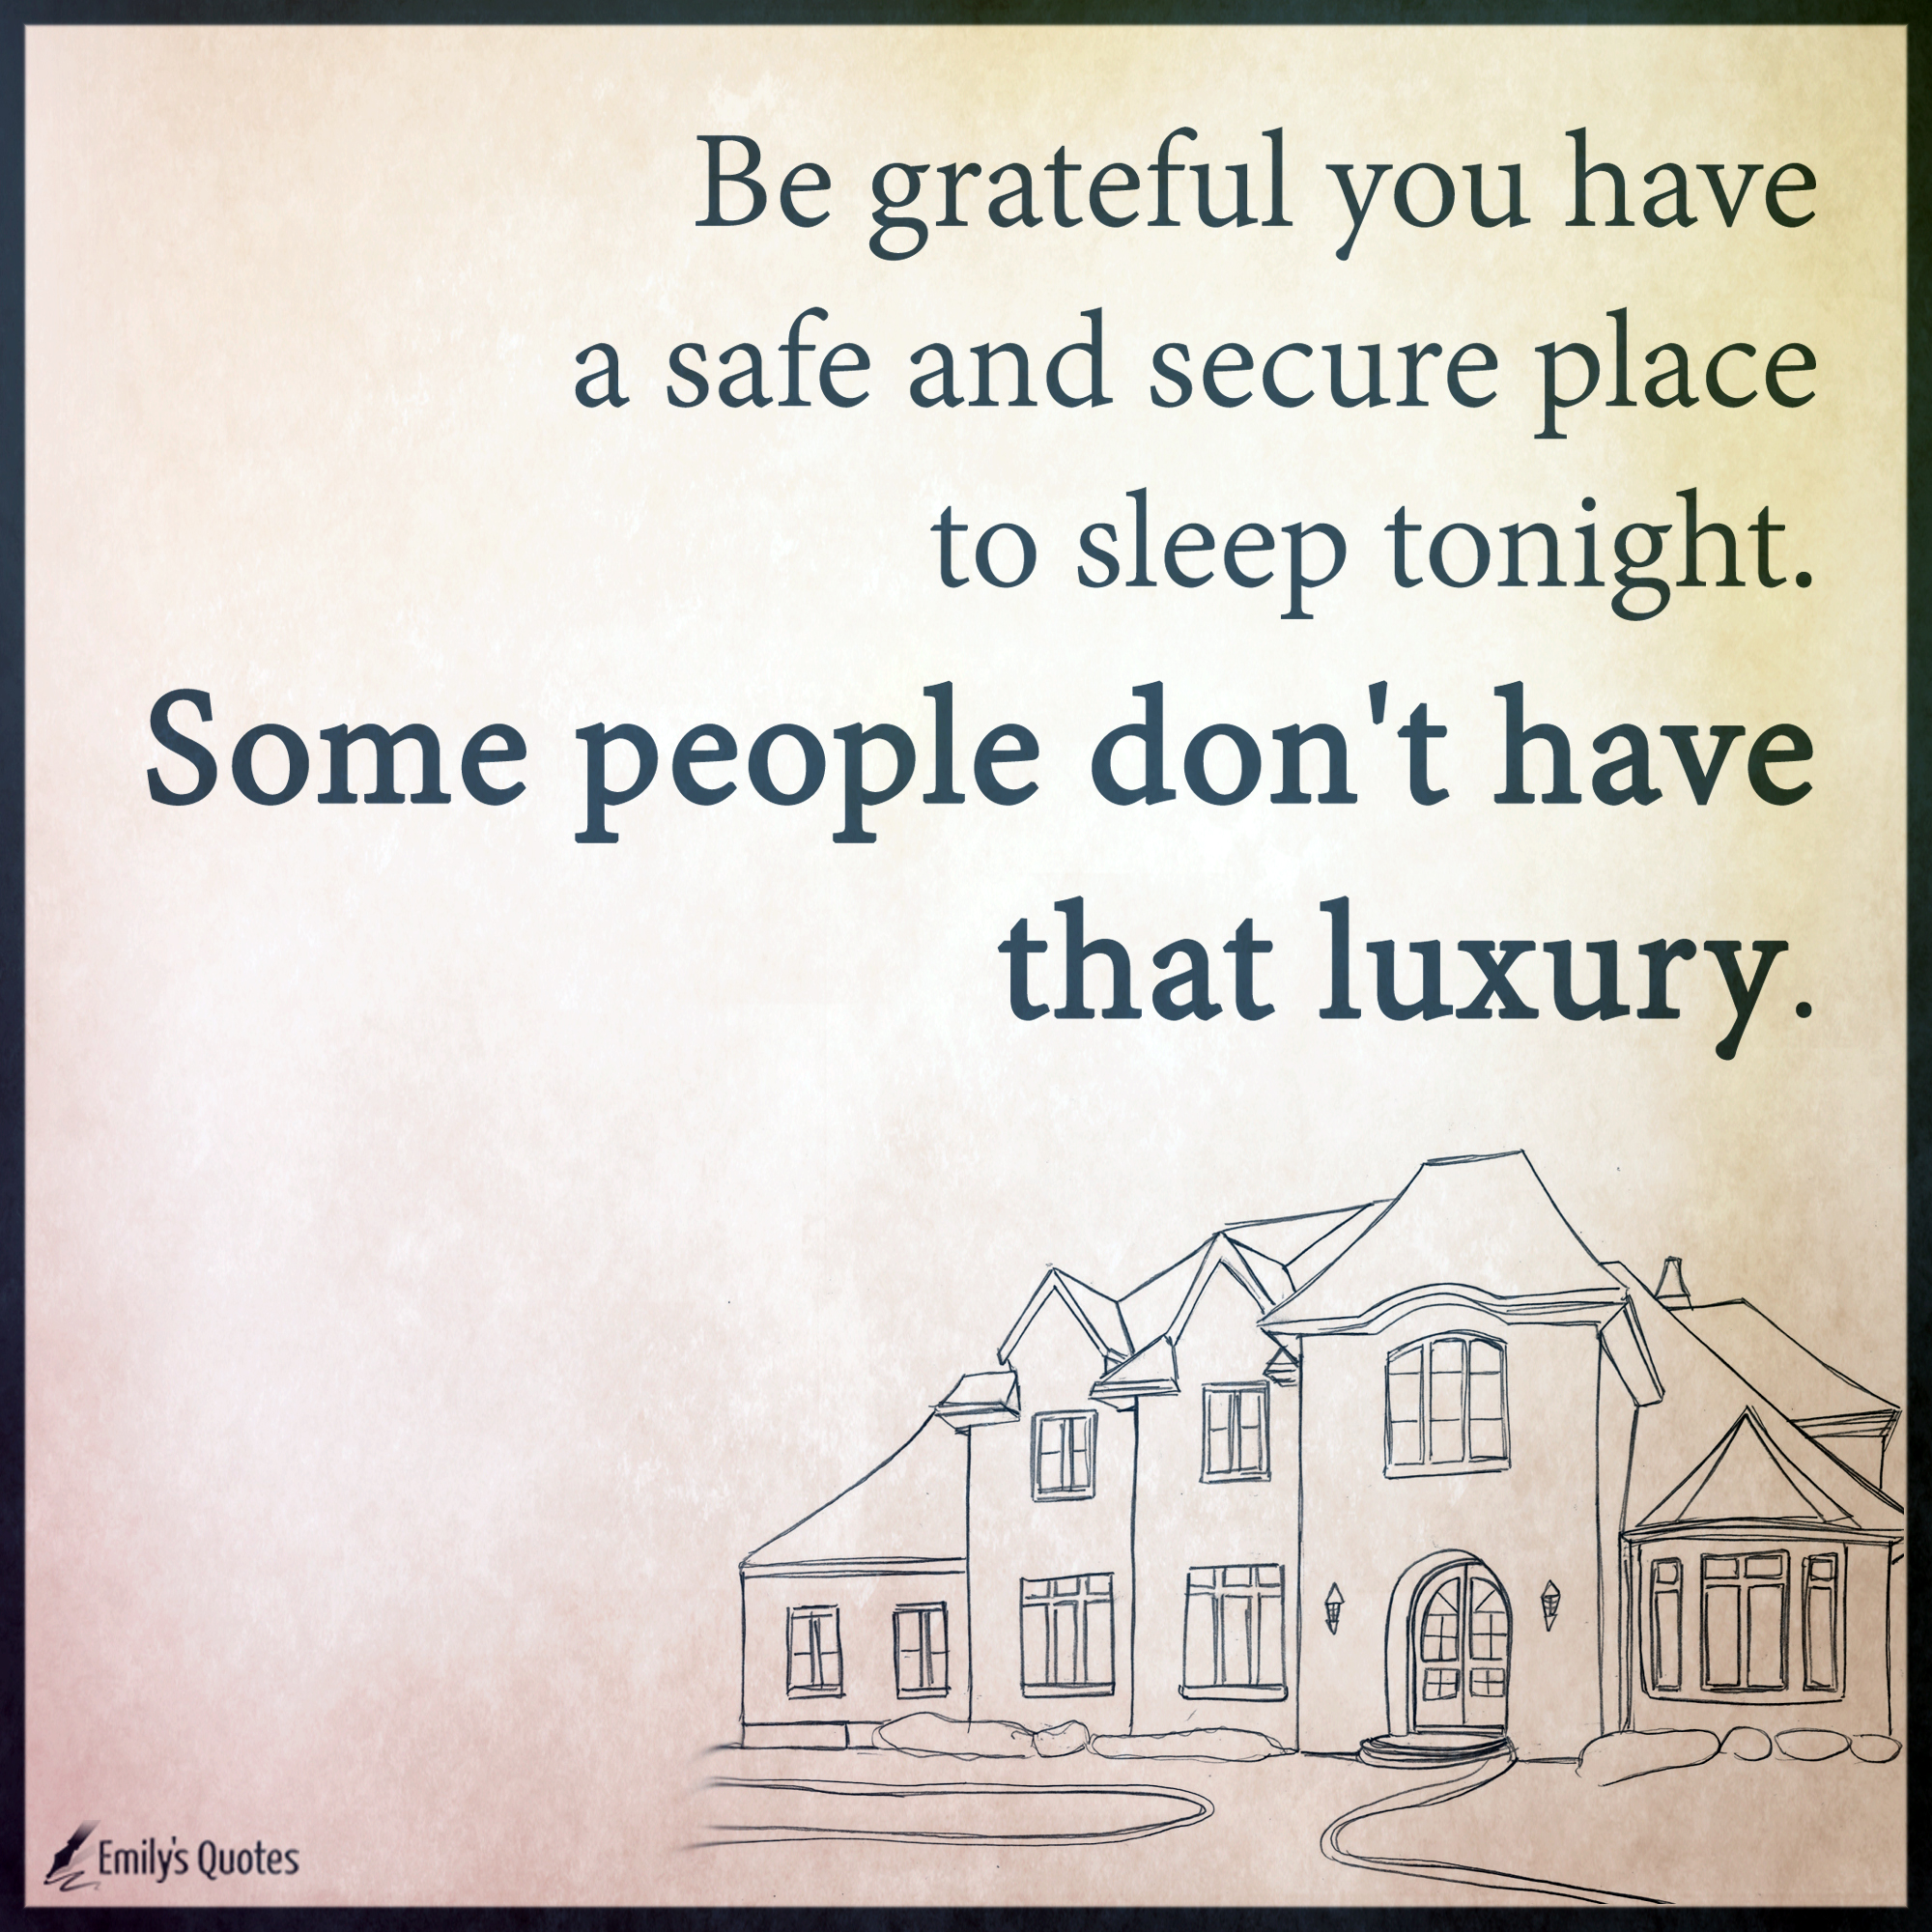 Be grateful you have a safe and secure place to sleep tonight. Some people